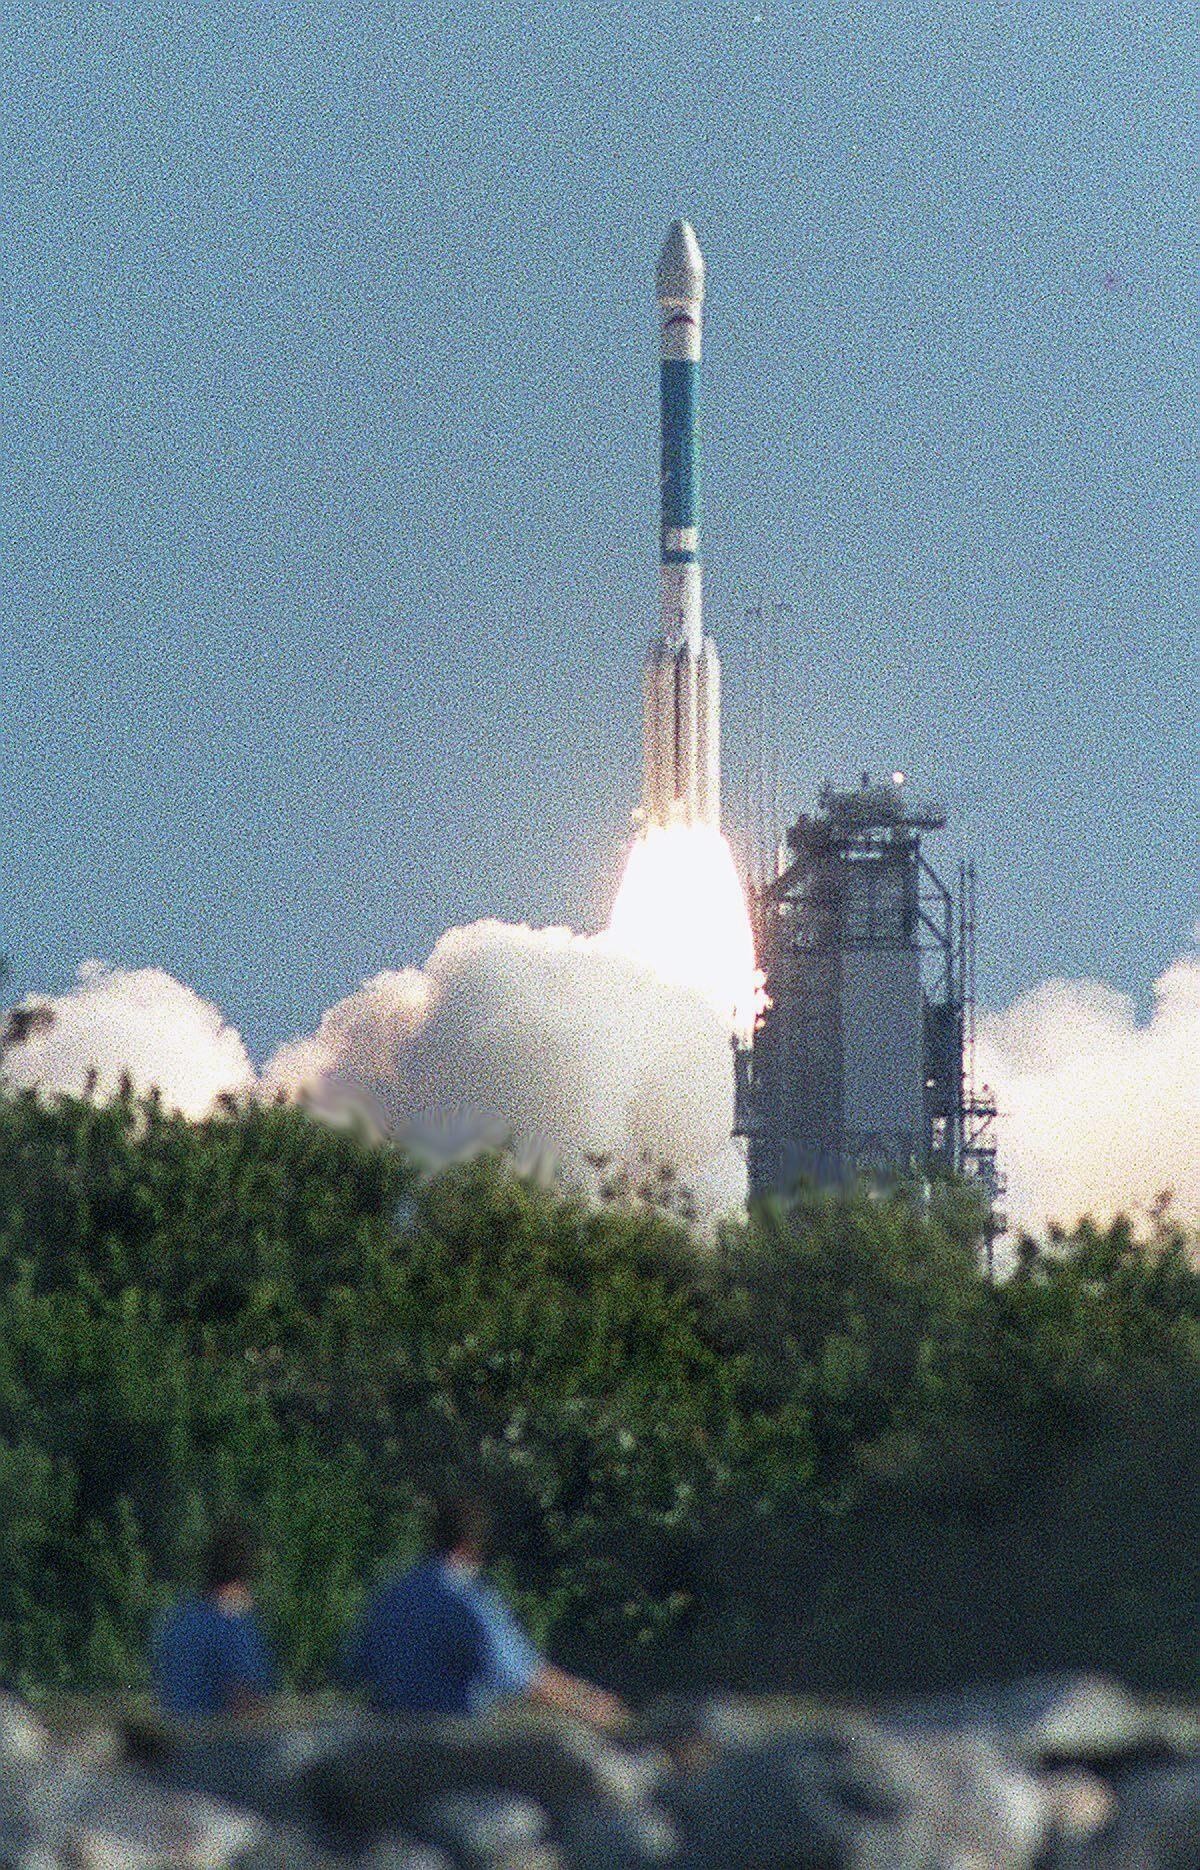 A US Air Force Delta 2 rocket launches from Pad 17A at Cape Canaveral Air Force Station in Florida, on Oct. 7, 1999. The three-stage Delta carried the third NAVSTAR Global Positioning Satellite into orbit to replace an aging satellite in the Air Force GPS network. (Bruce Weaver/AFP via Getty Images)